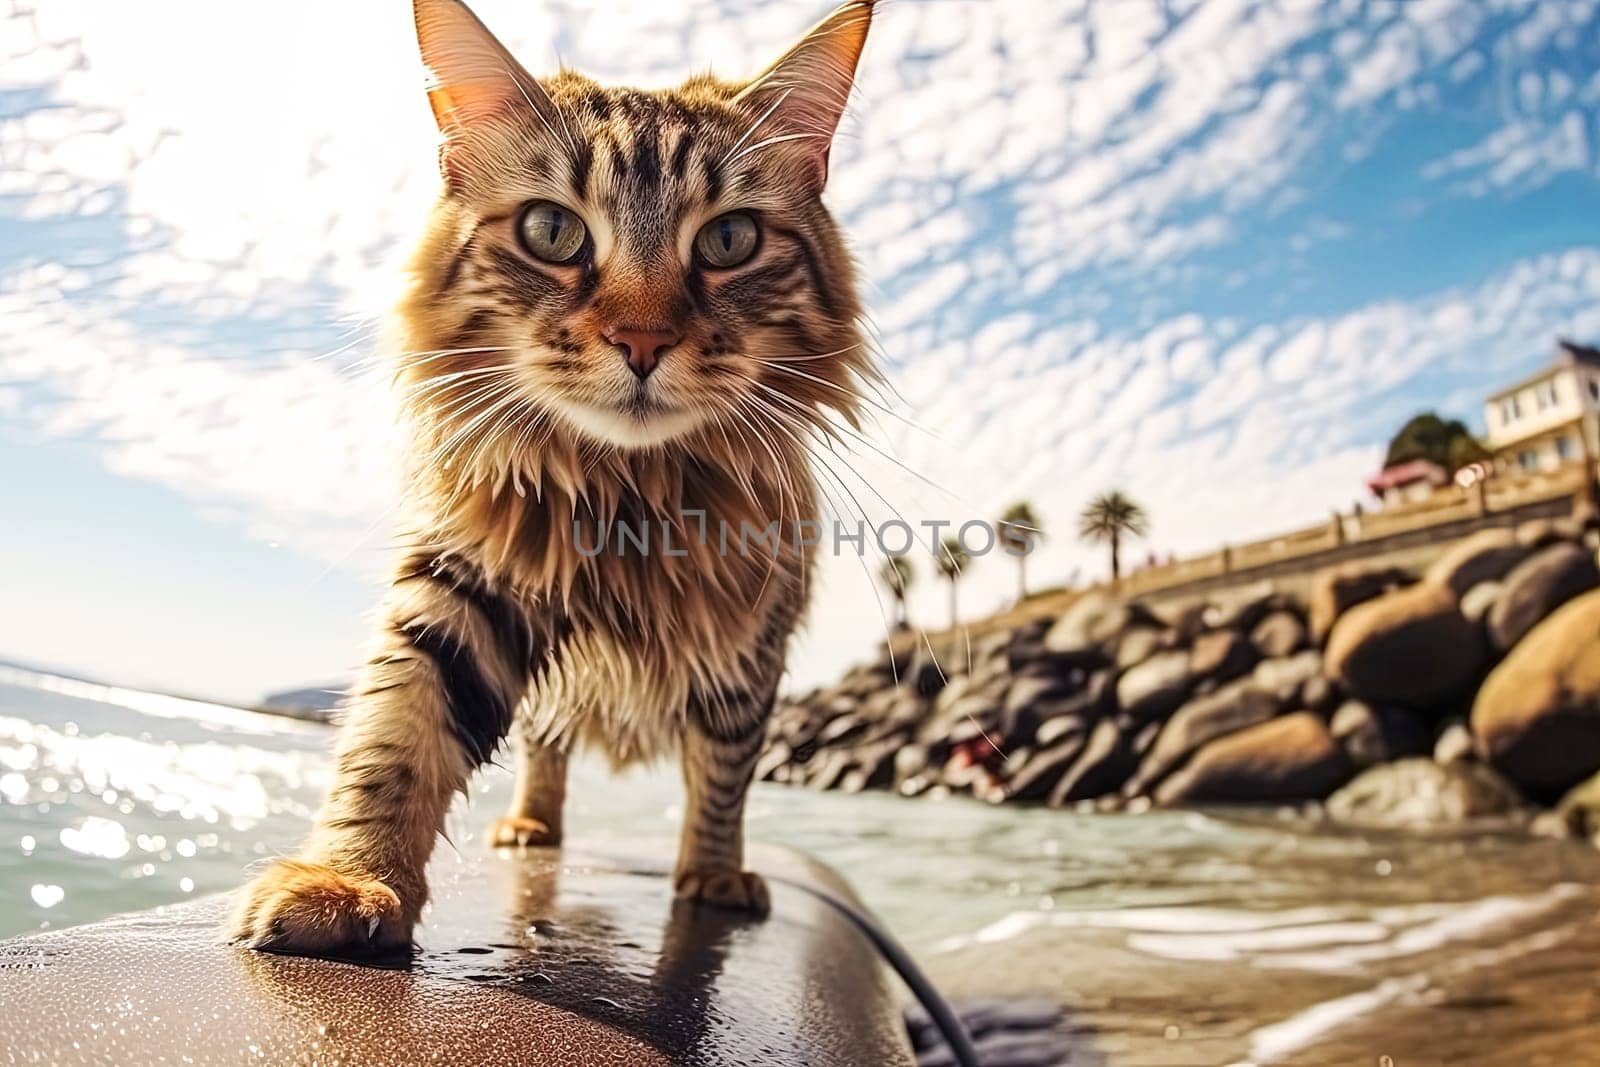 A cat with long fur is sitting on a ledge near the water. The cat appears to be staring off into the distance, possibly watching the waves or just enjoying the view. The scene has a calm